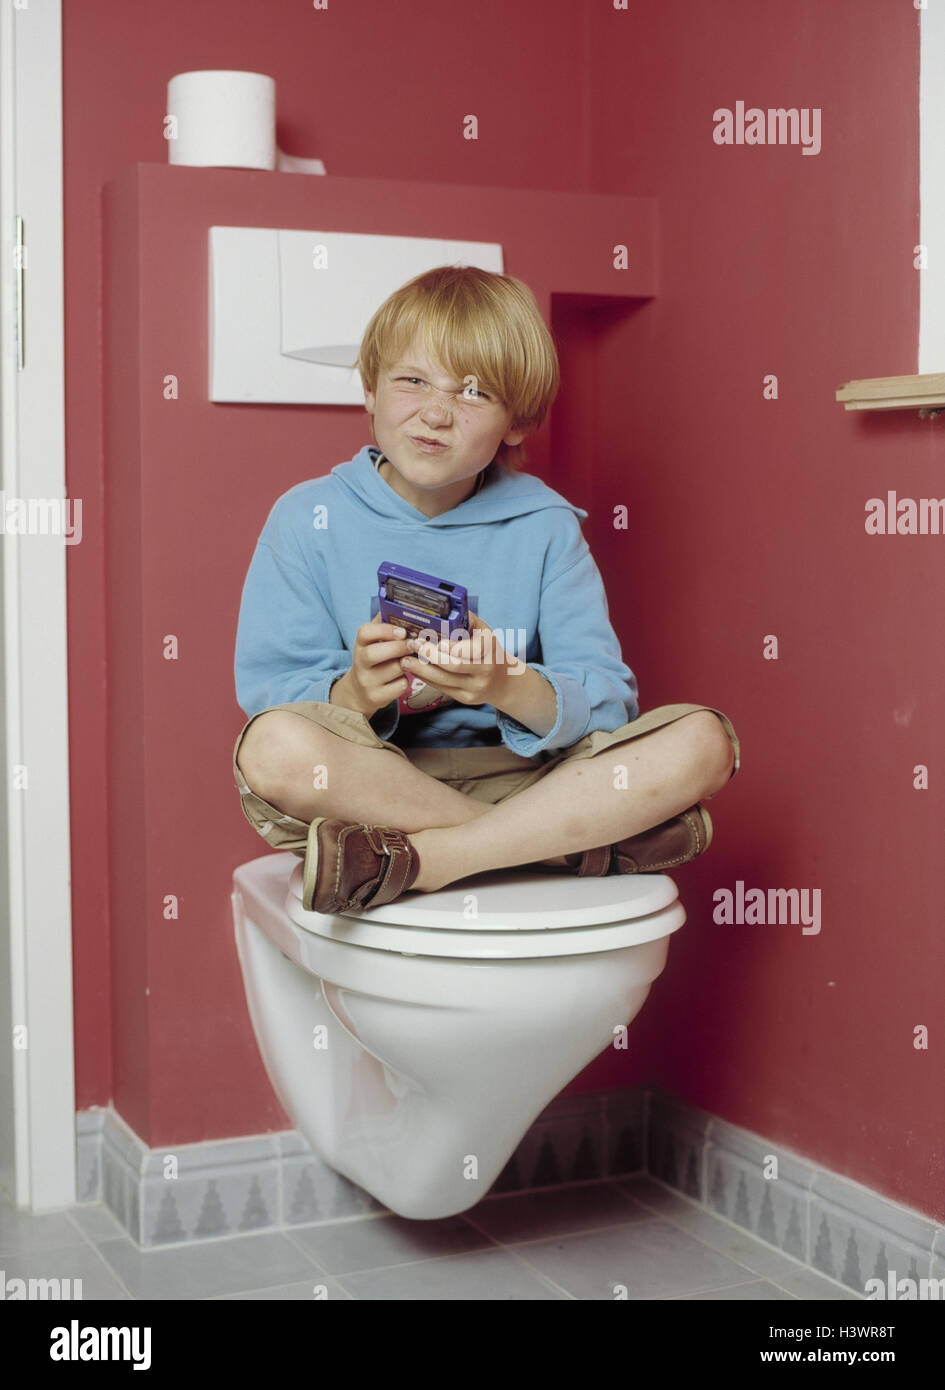 Toilet, boy, Gameboy, play, inside, bath, bathroom, child, 7 years, leisure time, childhood, gambling addiction, game, pouch computer, computer game, nose, to bodies, grimace, dissatisfied, discontent, expression Stock Photo